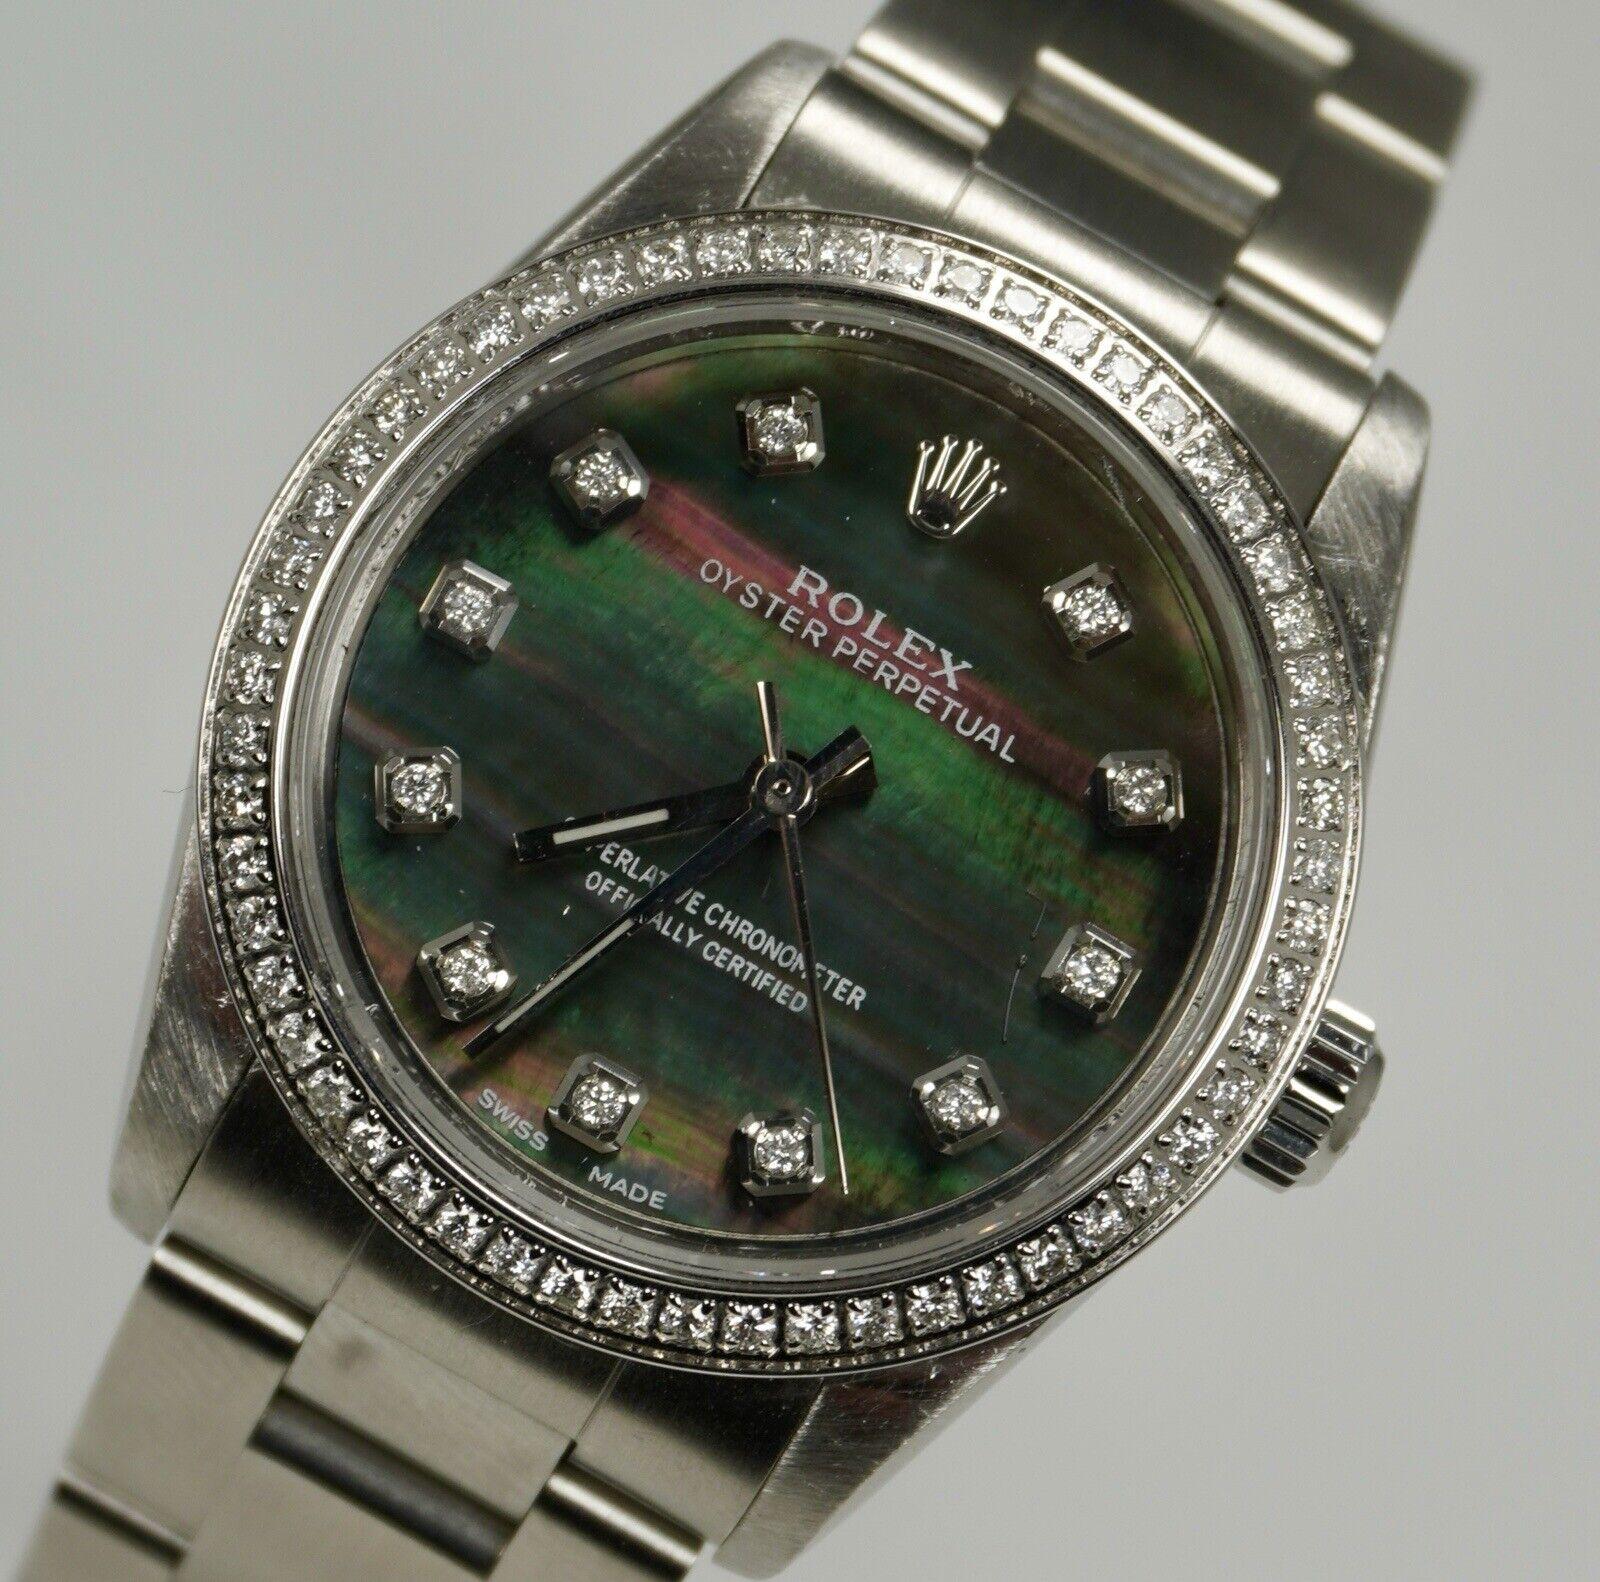 Rolex Oyster Perpetual 31mm Watch customized with 1 carats of Genuine Diamonds! The entire bezel has been beautifully handset in white 